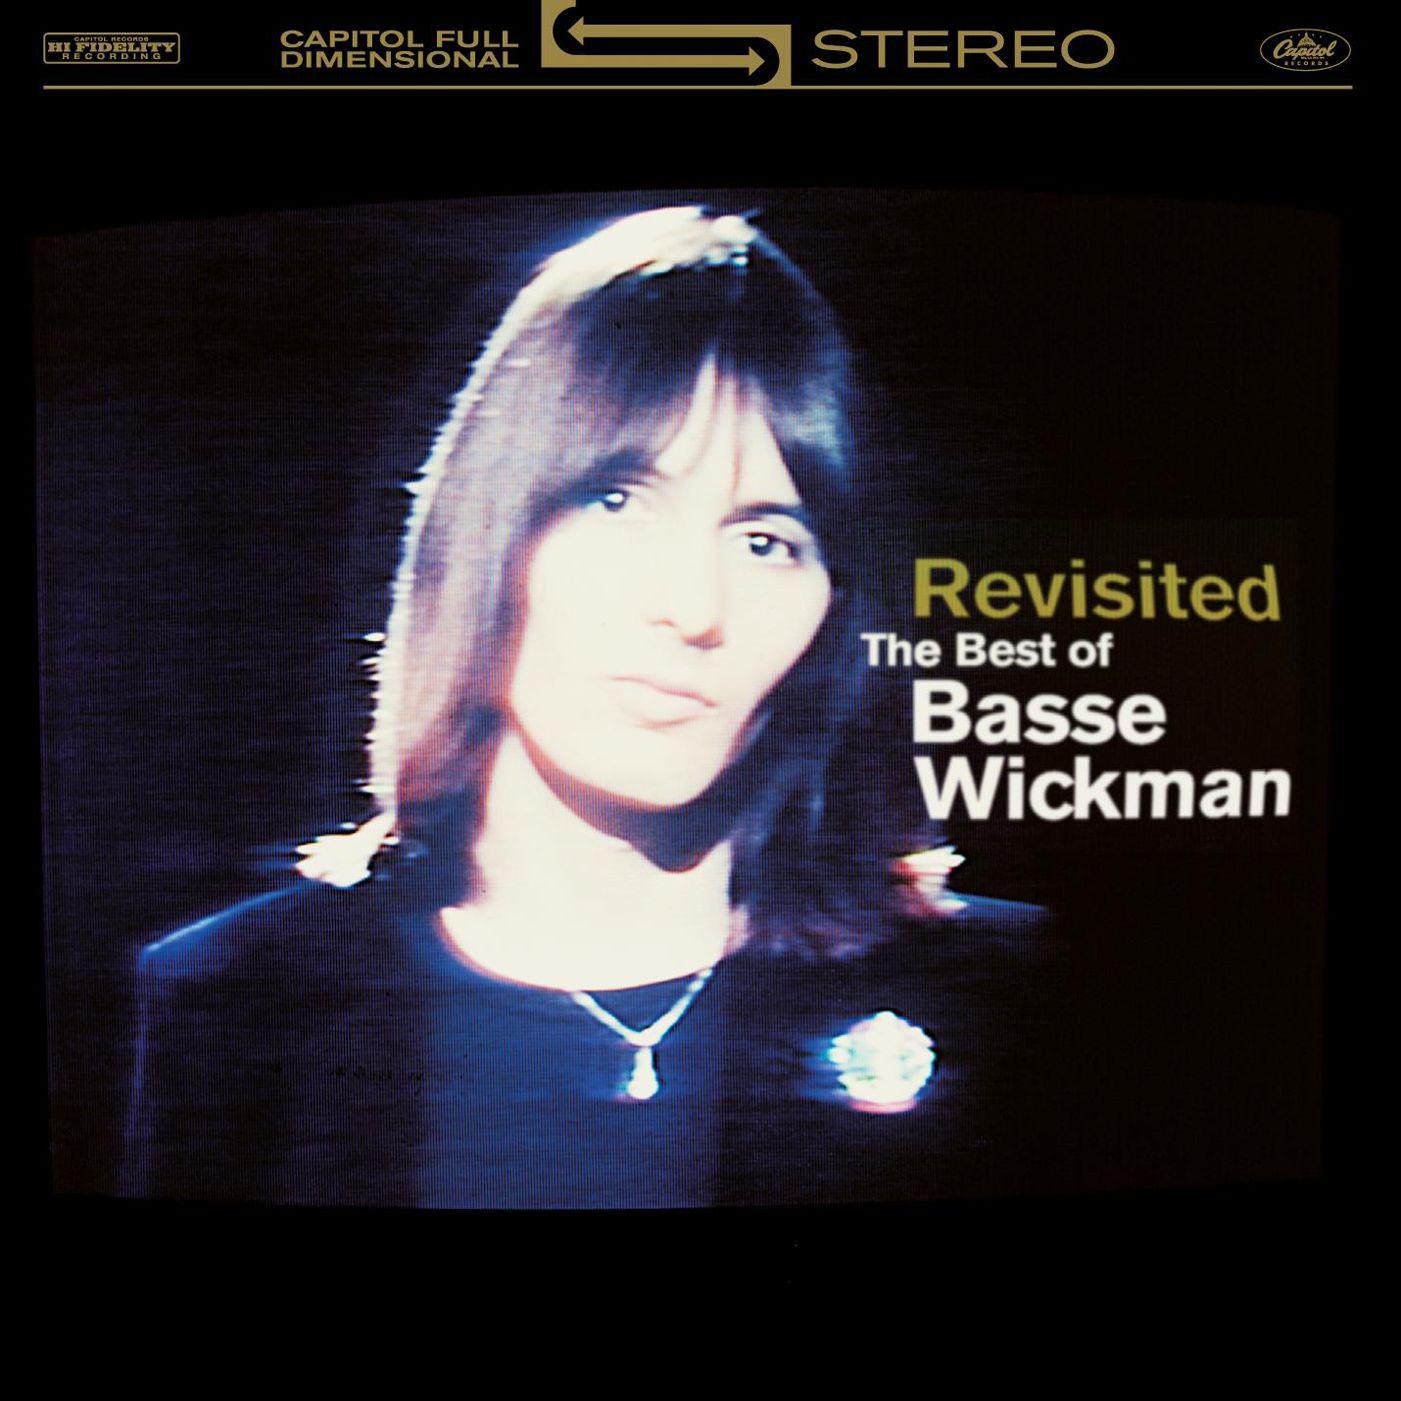 Basse Wickman - The Promise (2005 Remaster)